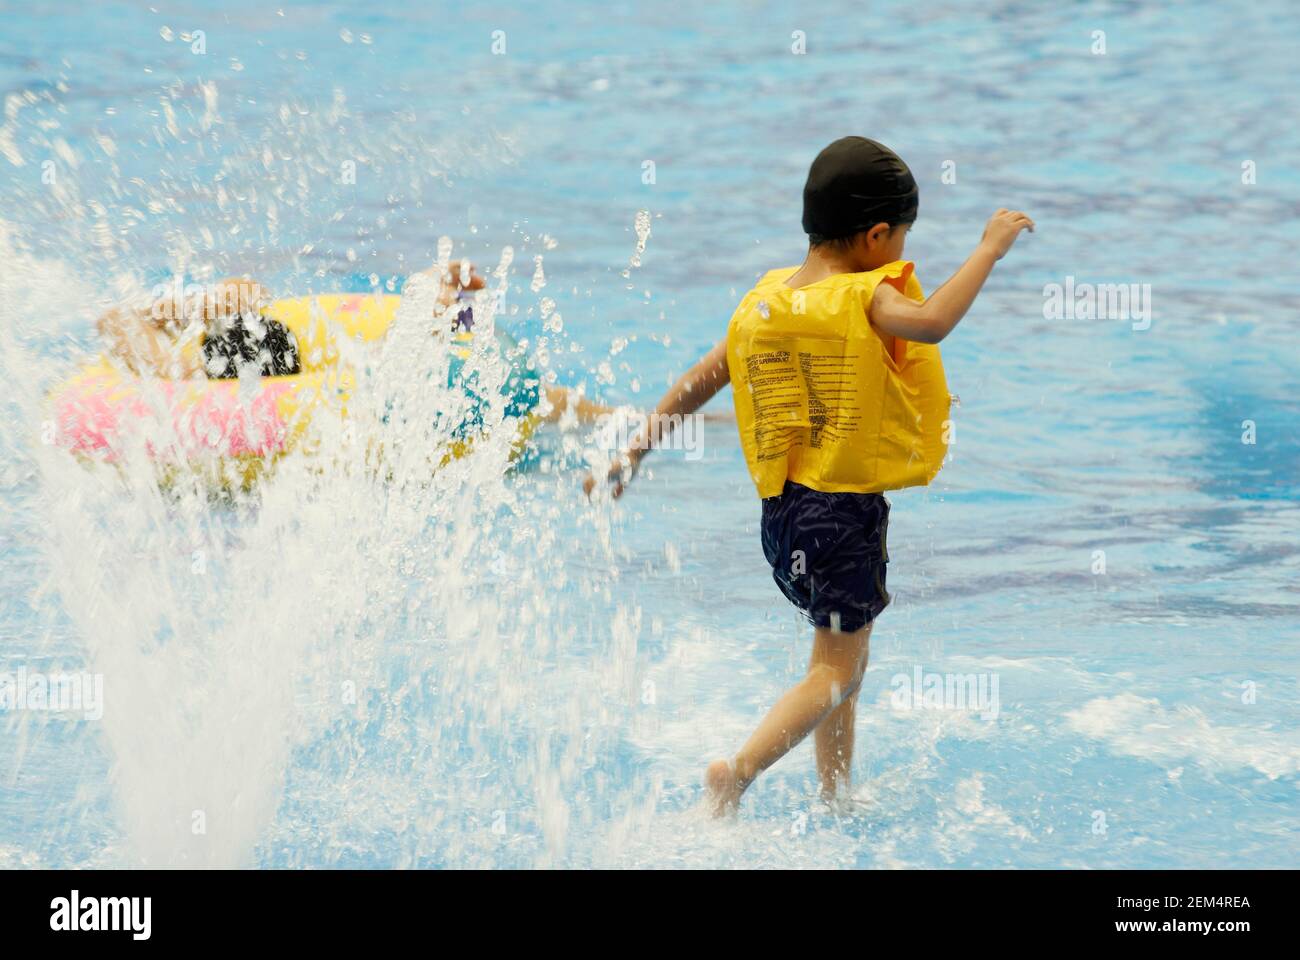 Children playing in water Stock Photo